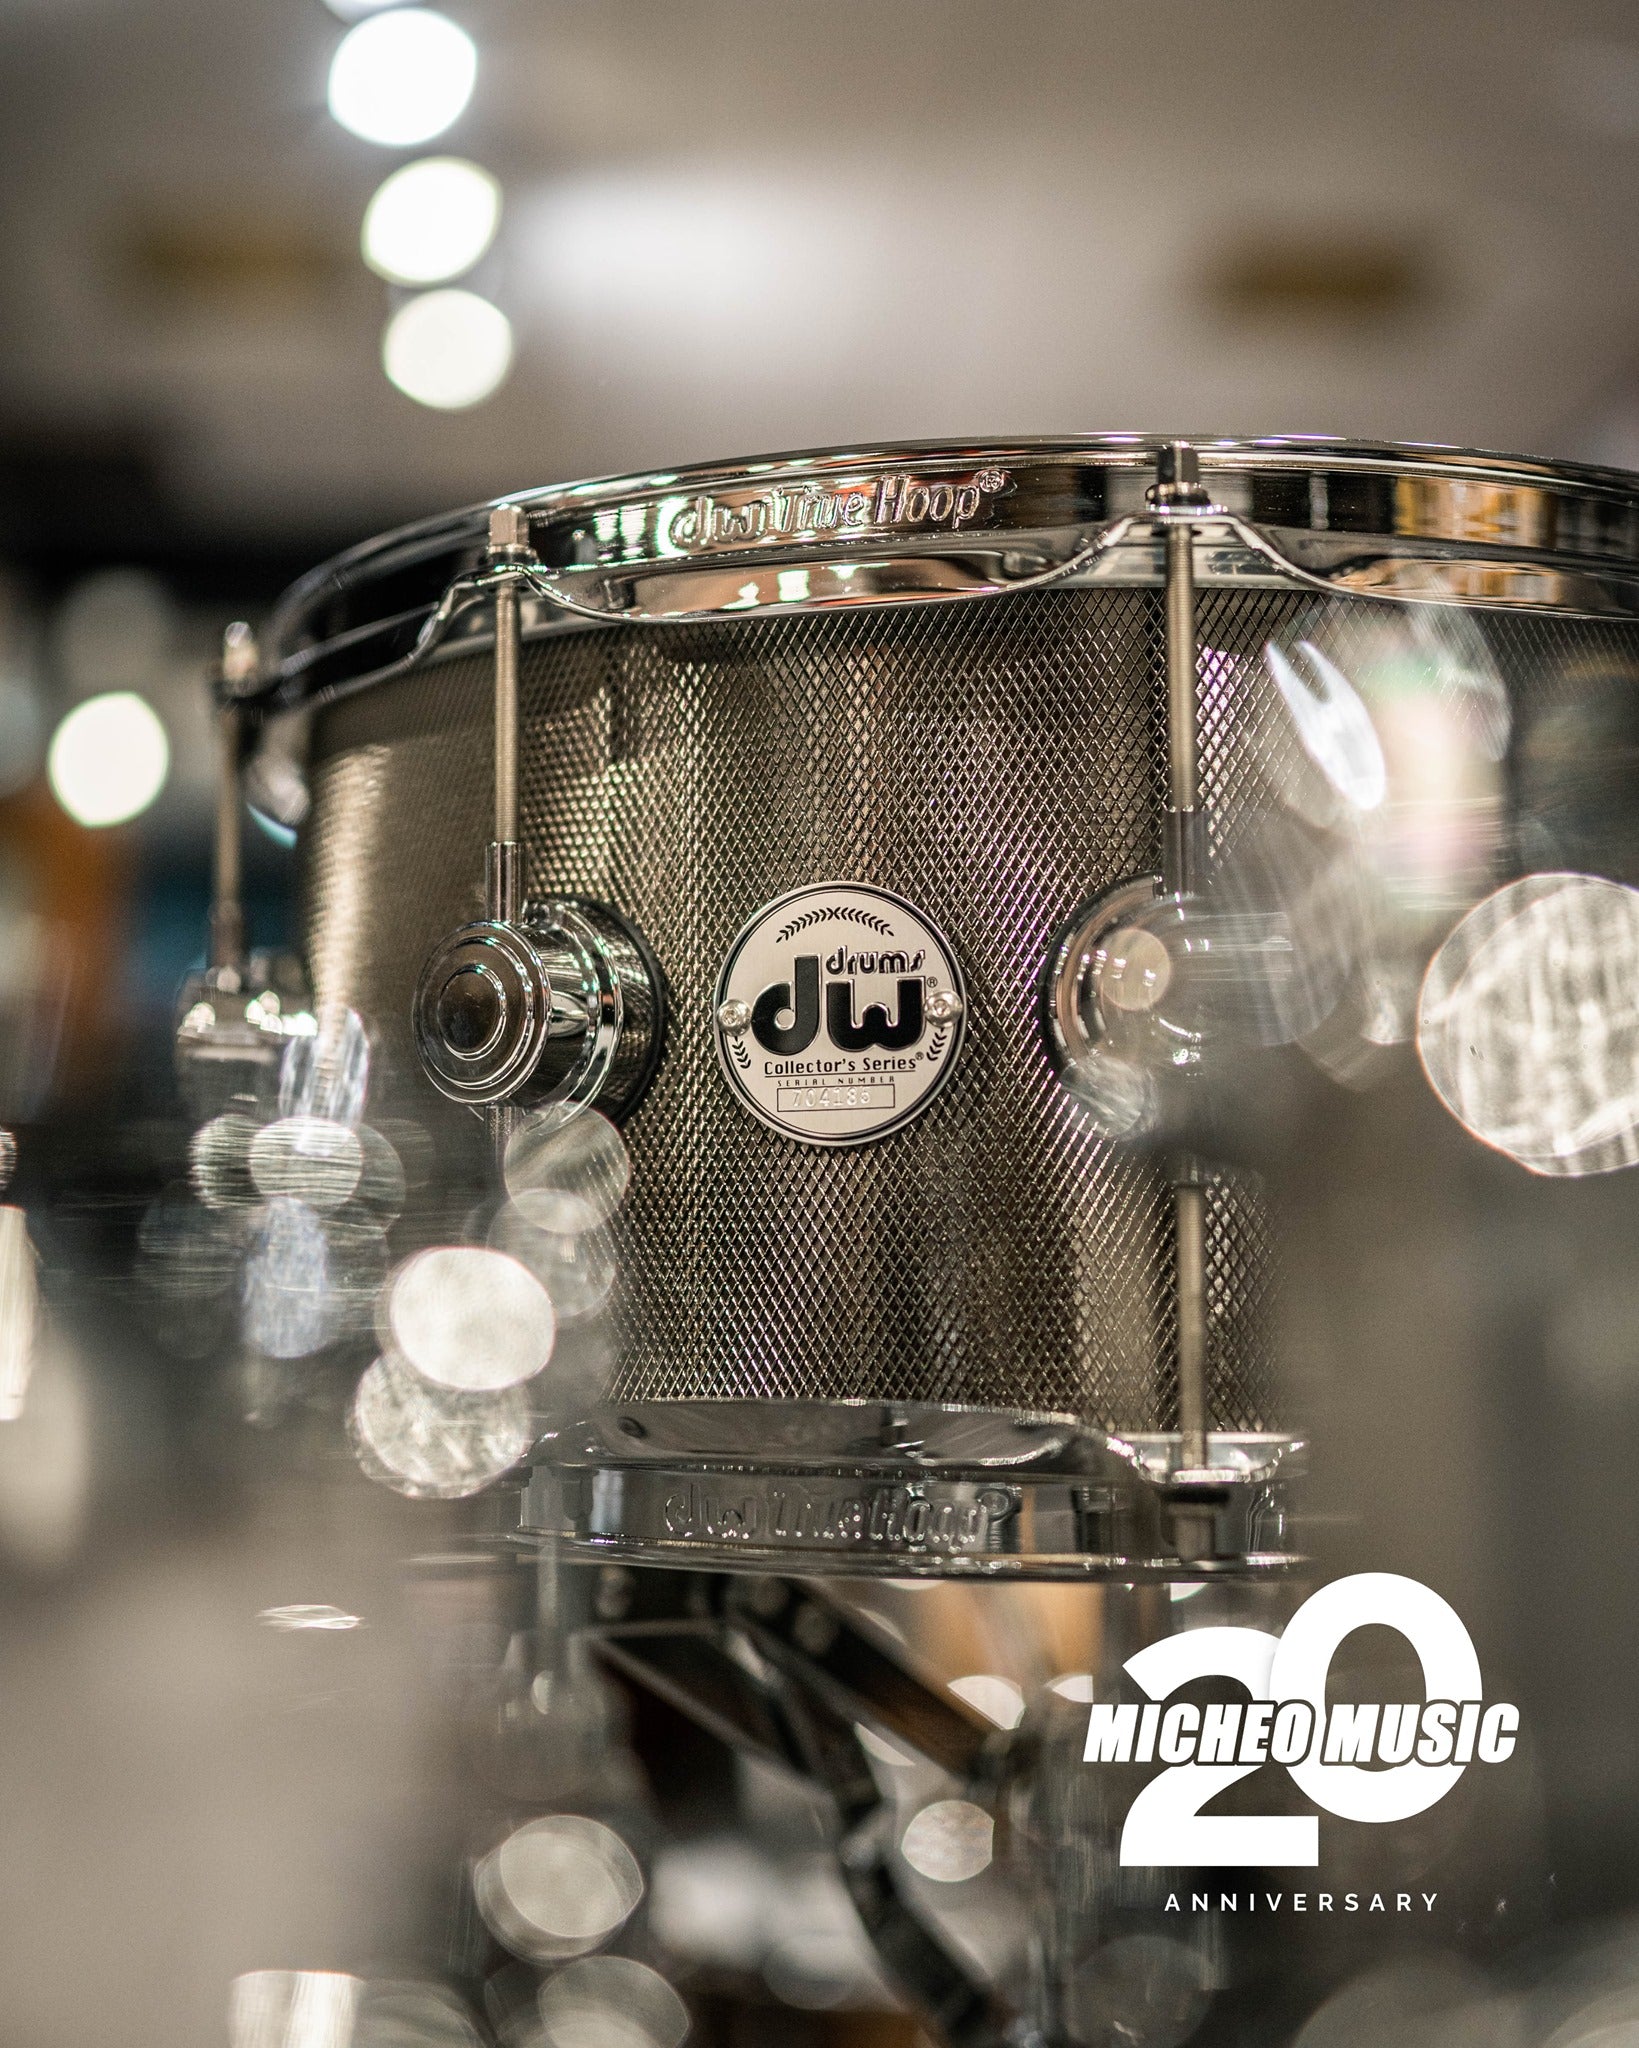 DW 5.5" x 14" Collector's Series Knurled Black Nickel Over Stainless Steel Snare